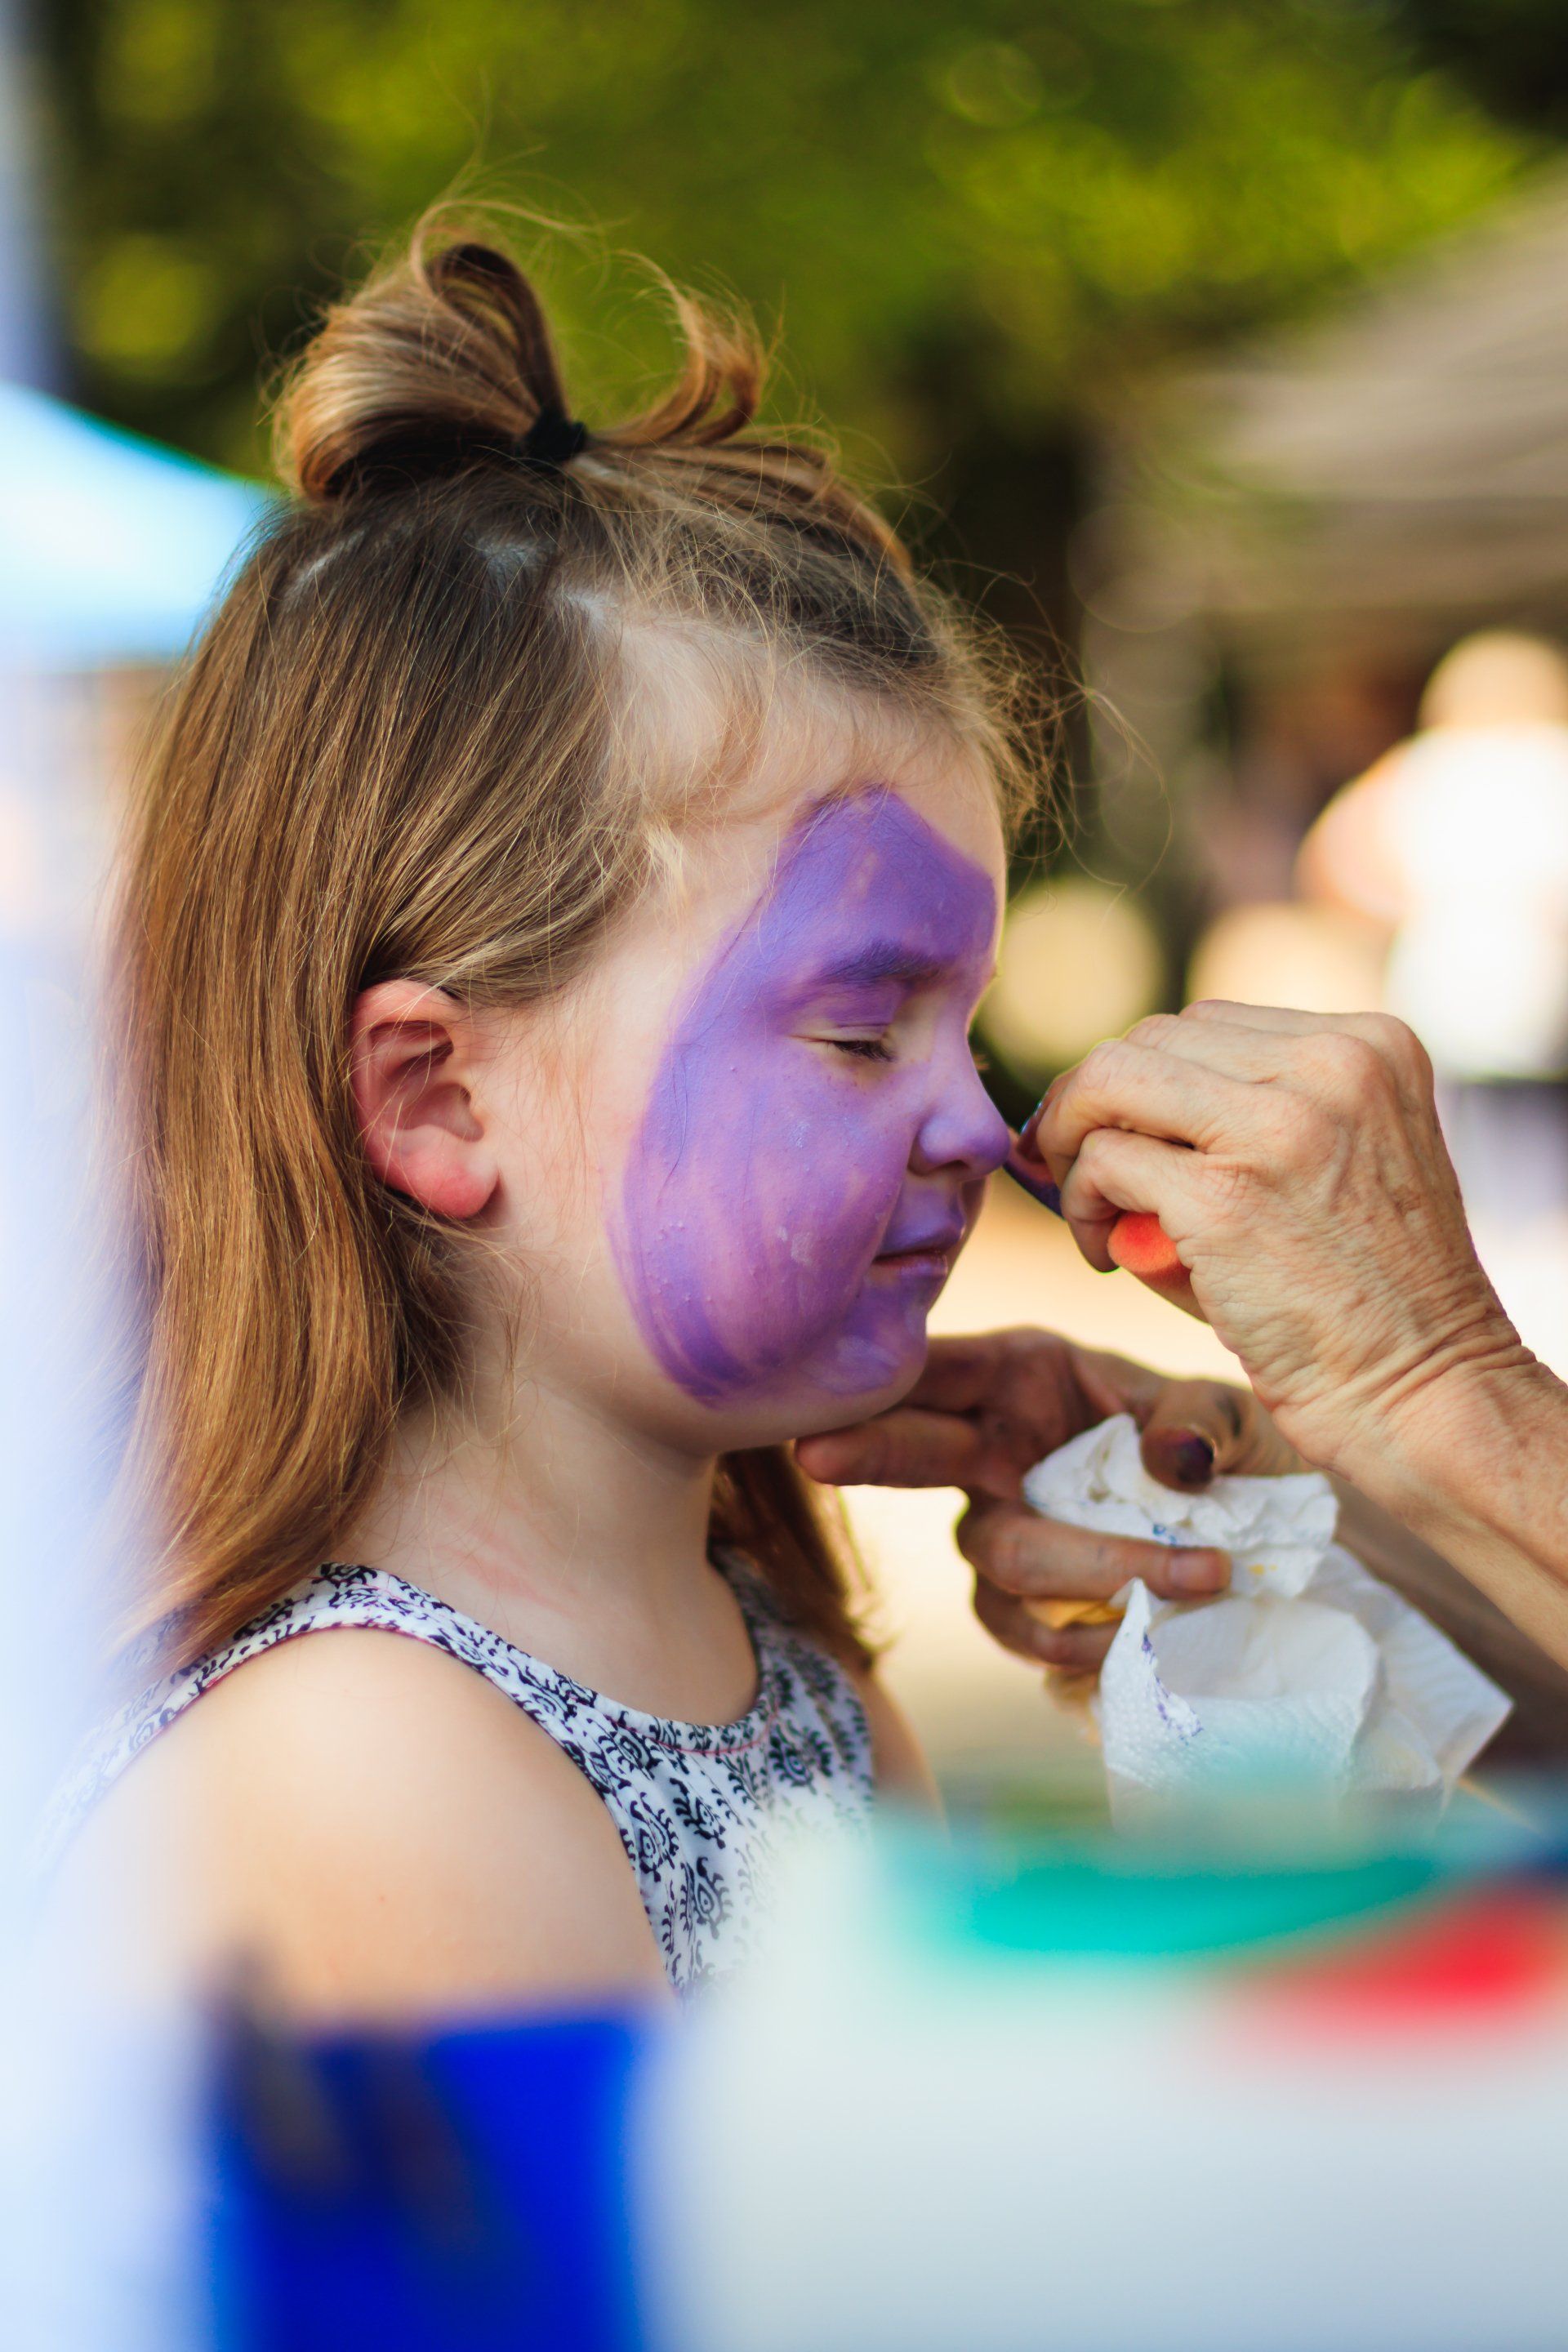 Little girl getting her face painted